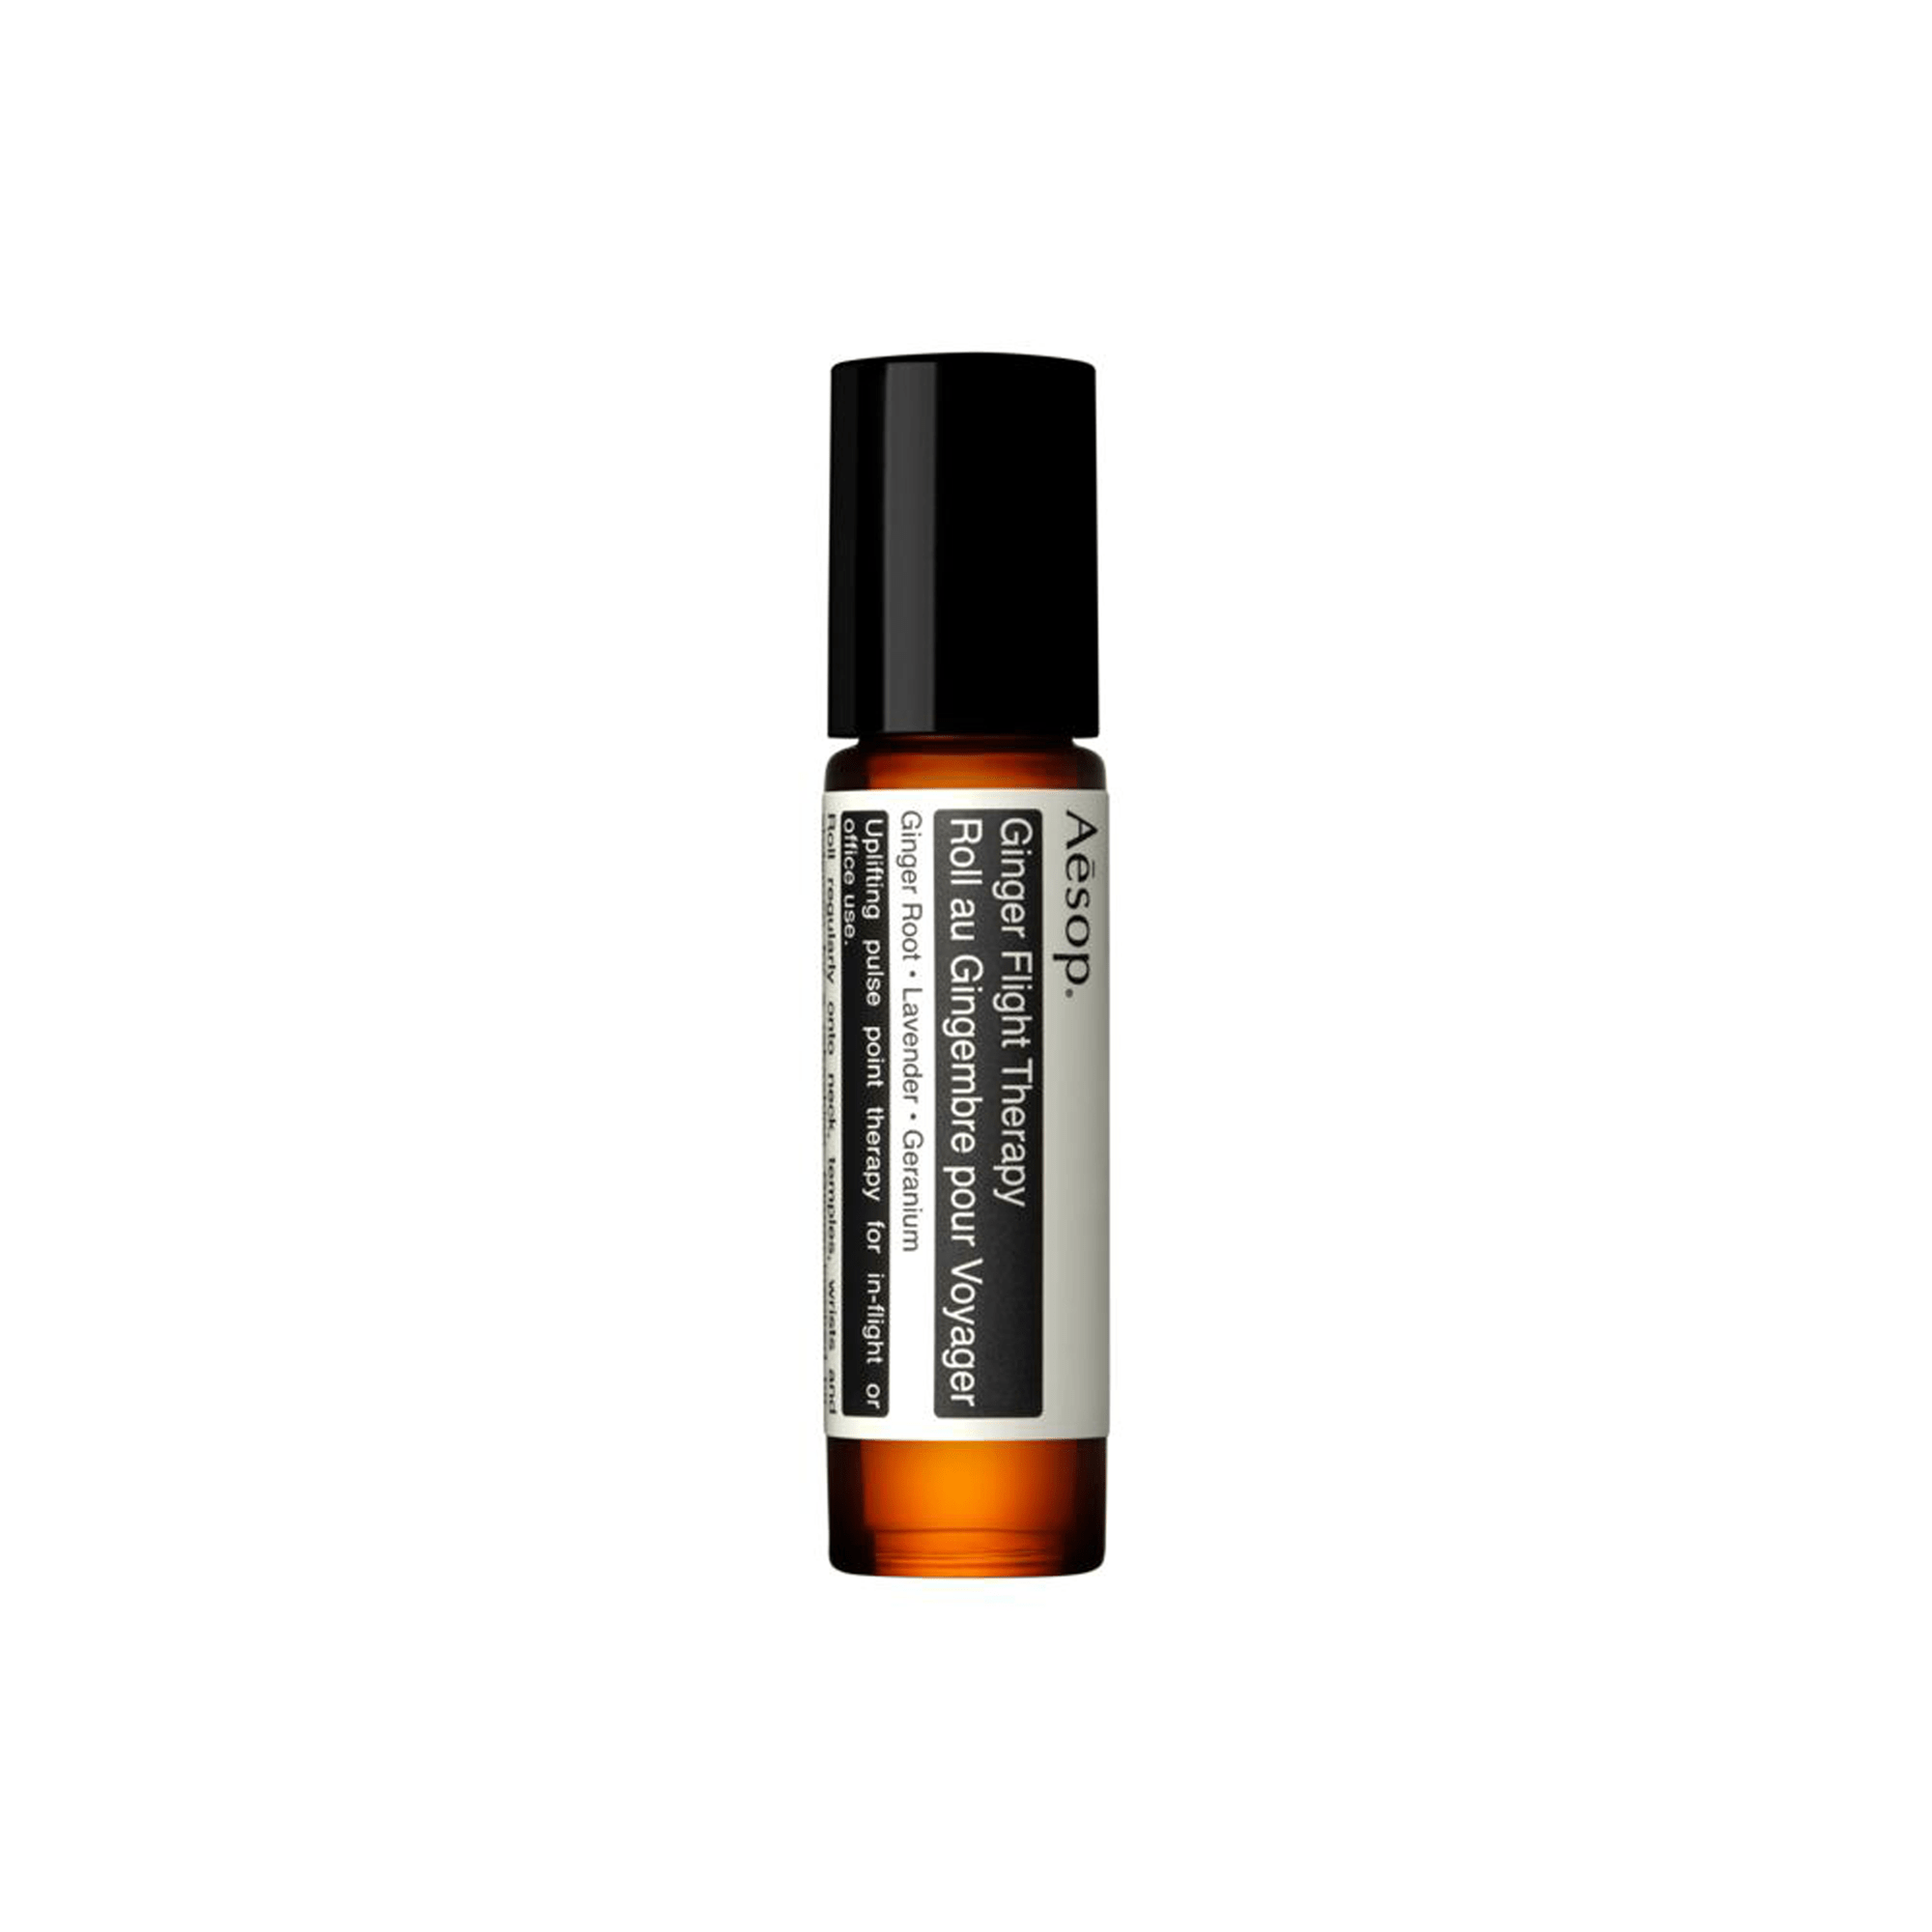 Ginger Flight Therapy Aesop Therapeutic roll-on